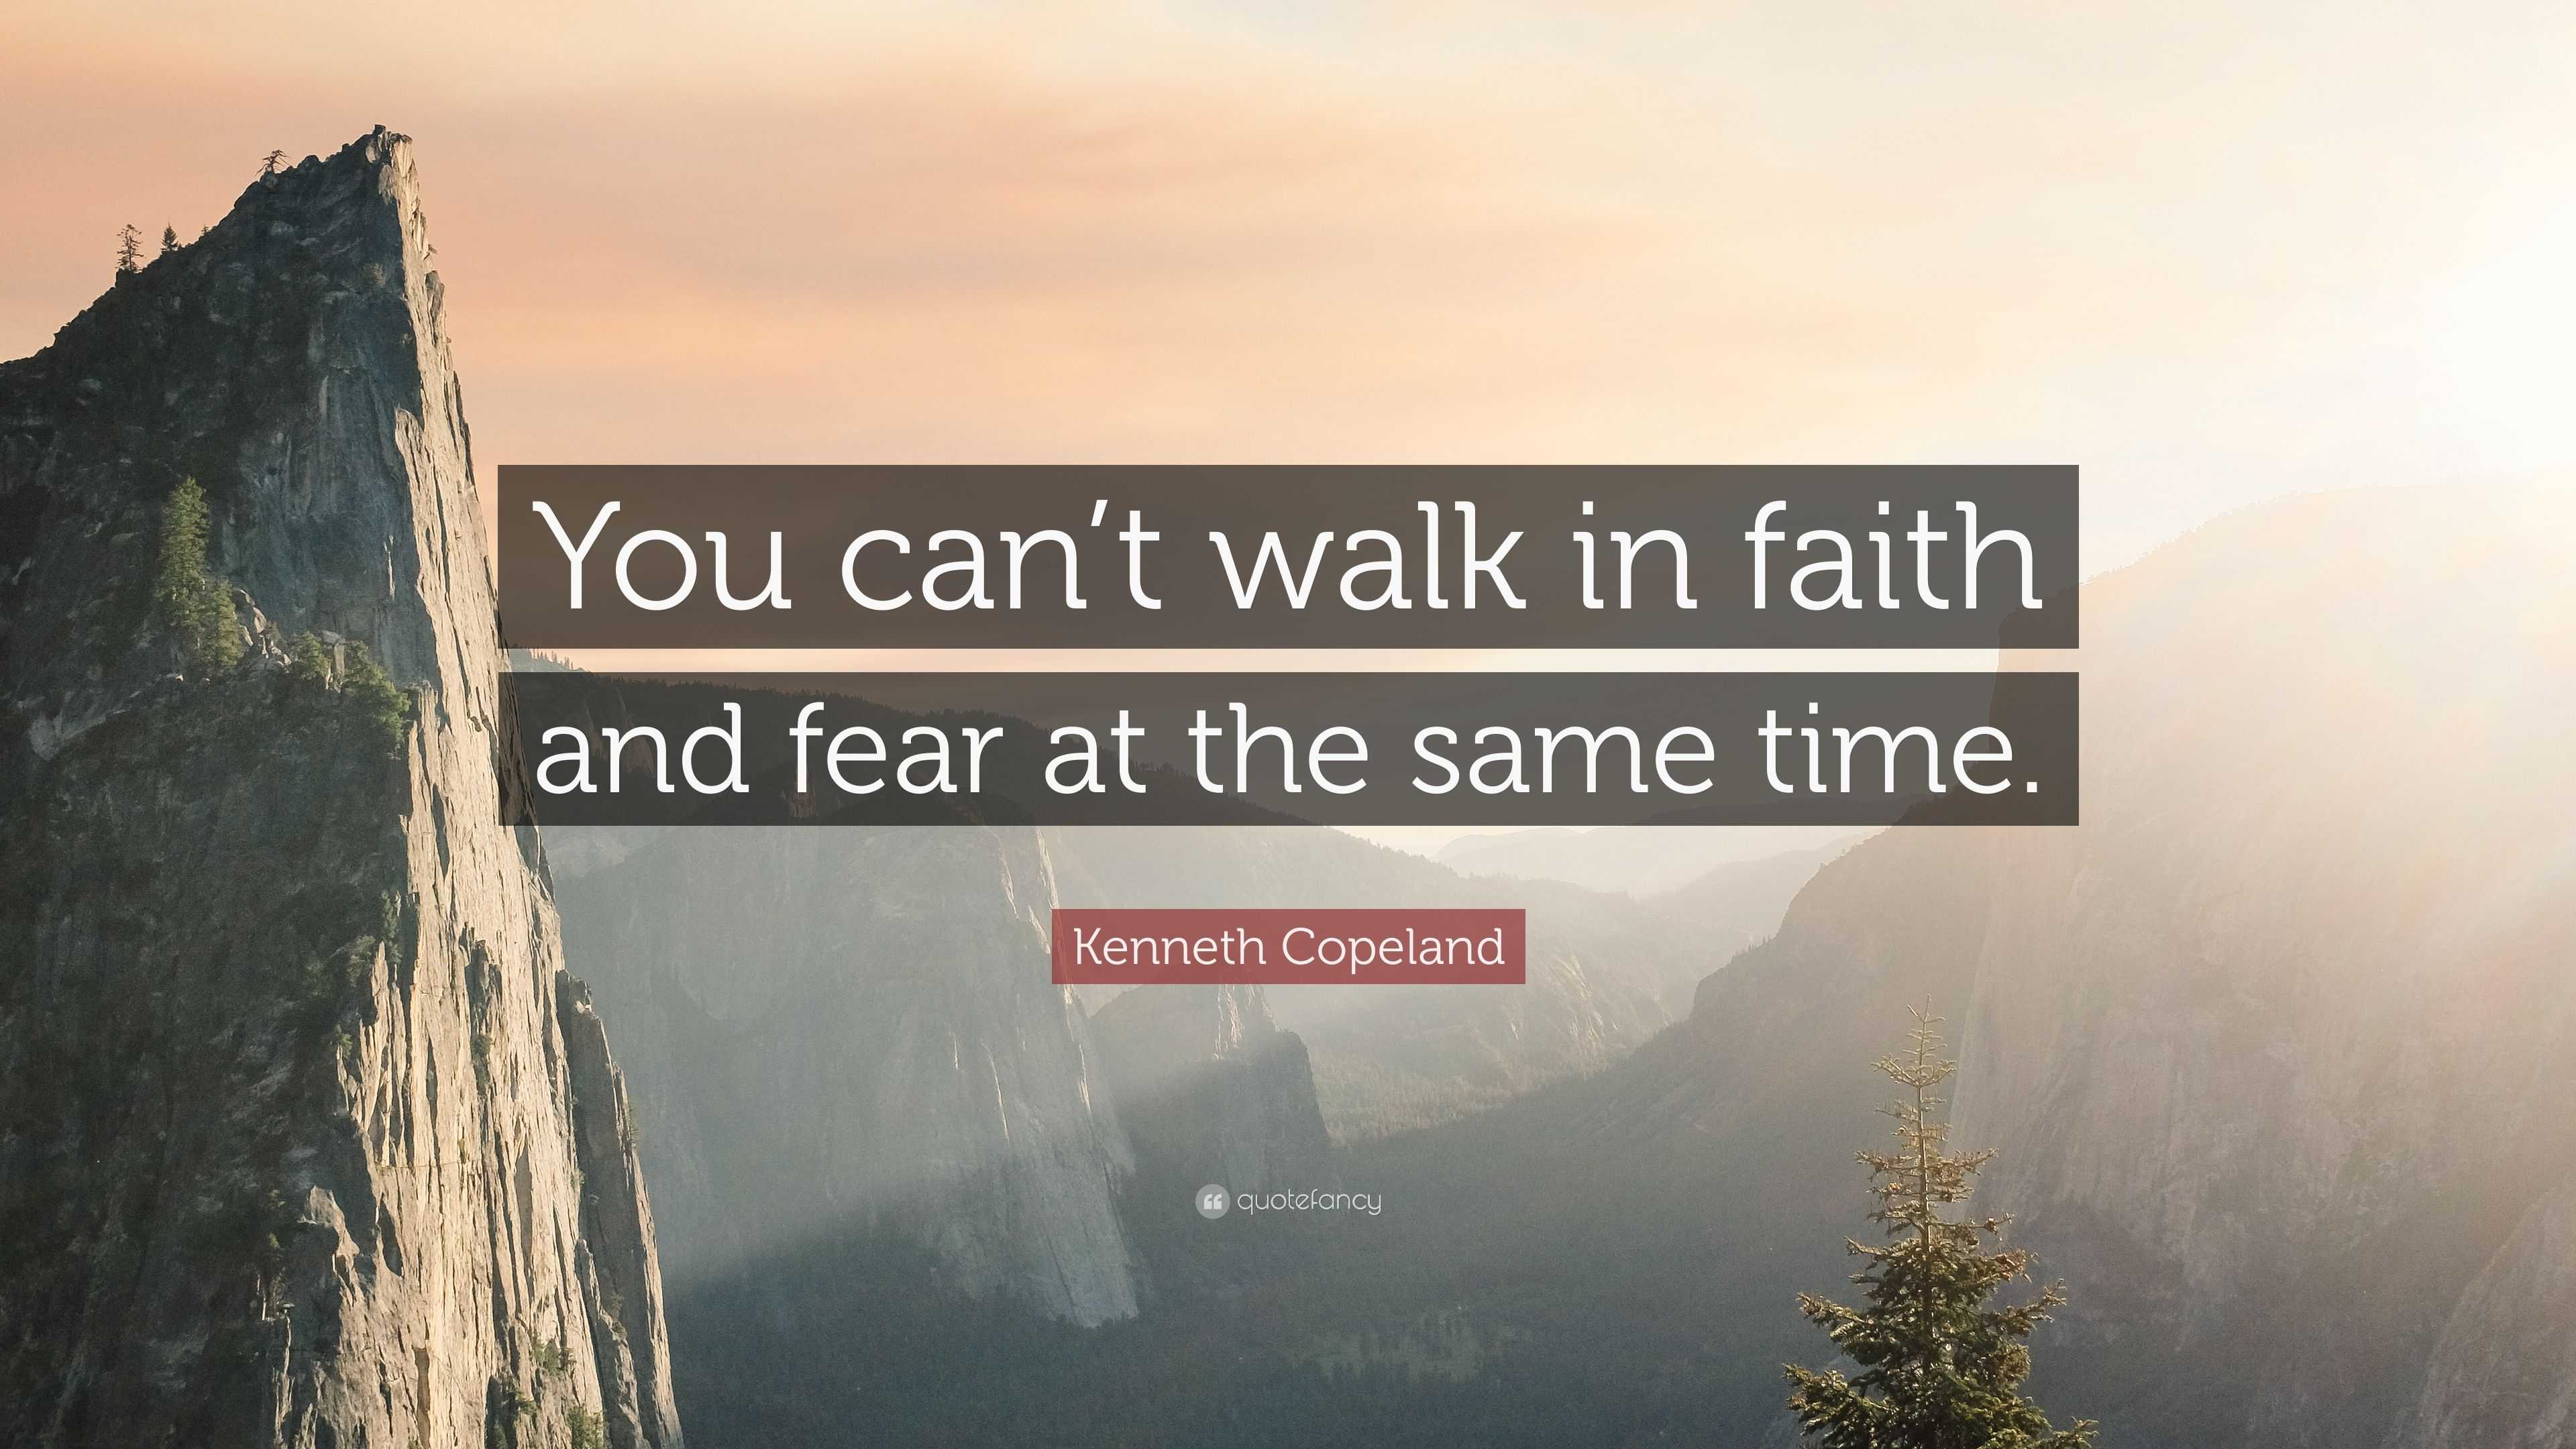 Kenneth Copeland Quote: "You can't walk in faith and fear at the same time." (9 wallpapers ...